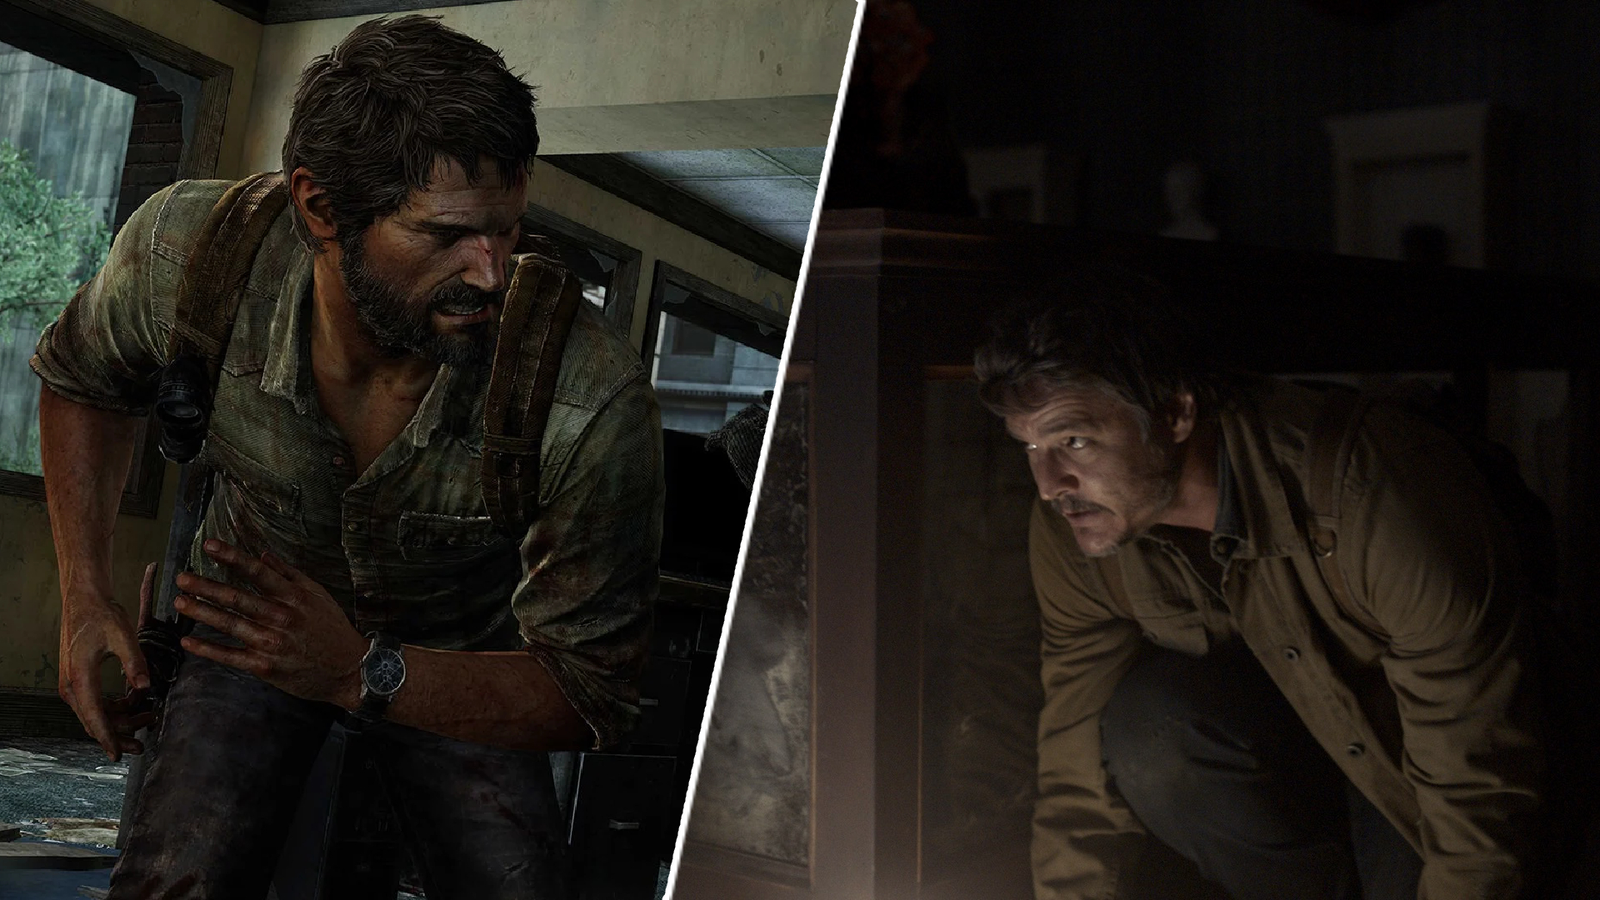 The Last of Us Part 2 Remastered: where to pre-order - Polygon